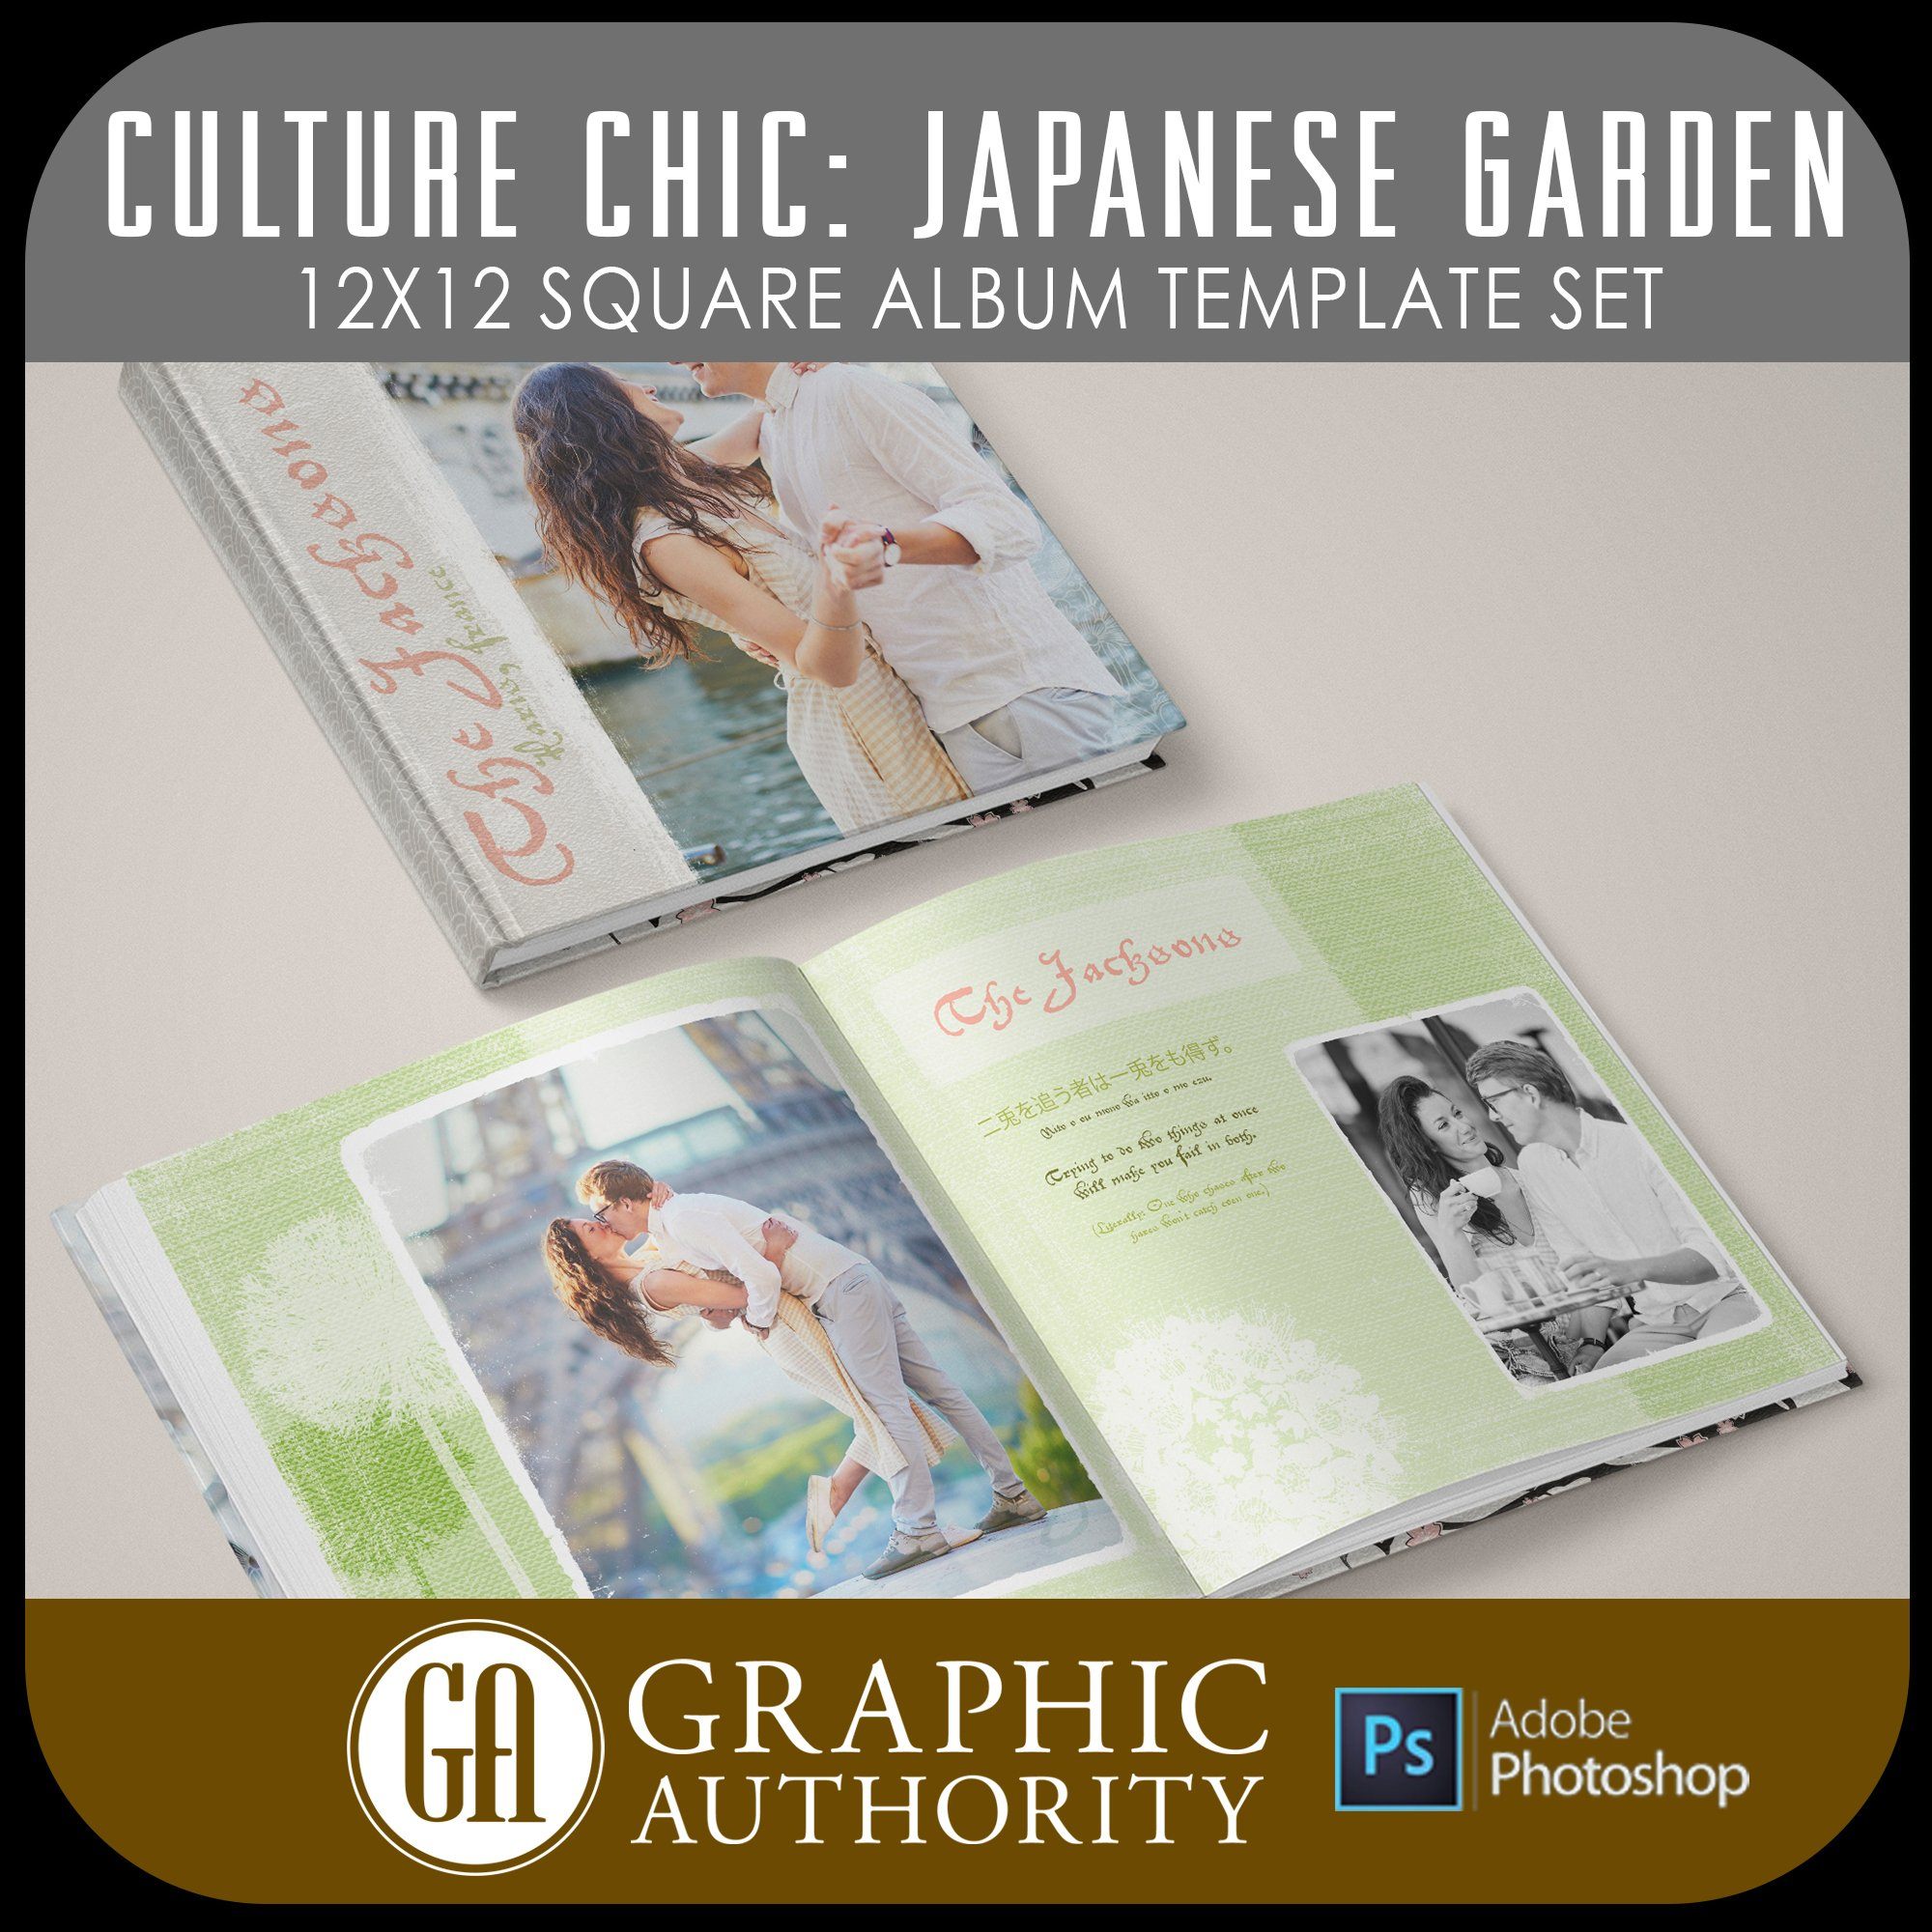 Culture Chic - Japanese Garden - 12x24 - Album Spreads-Photoshop Template - Graphic Authority